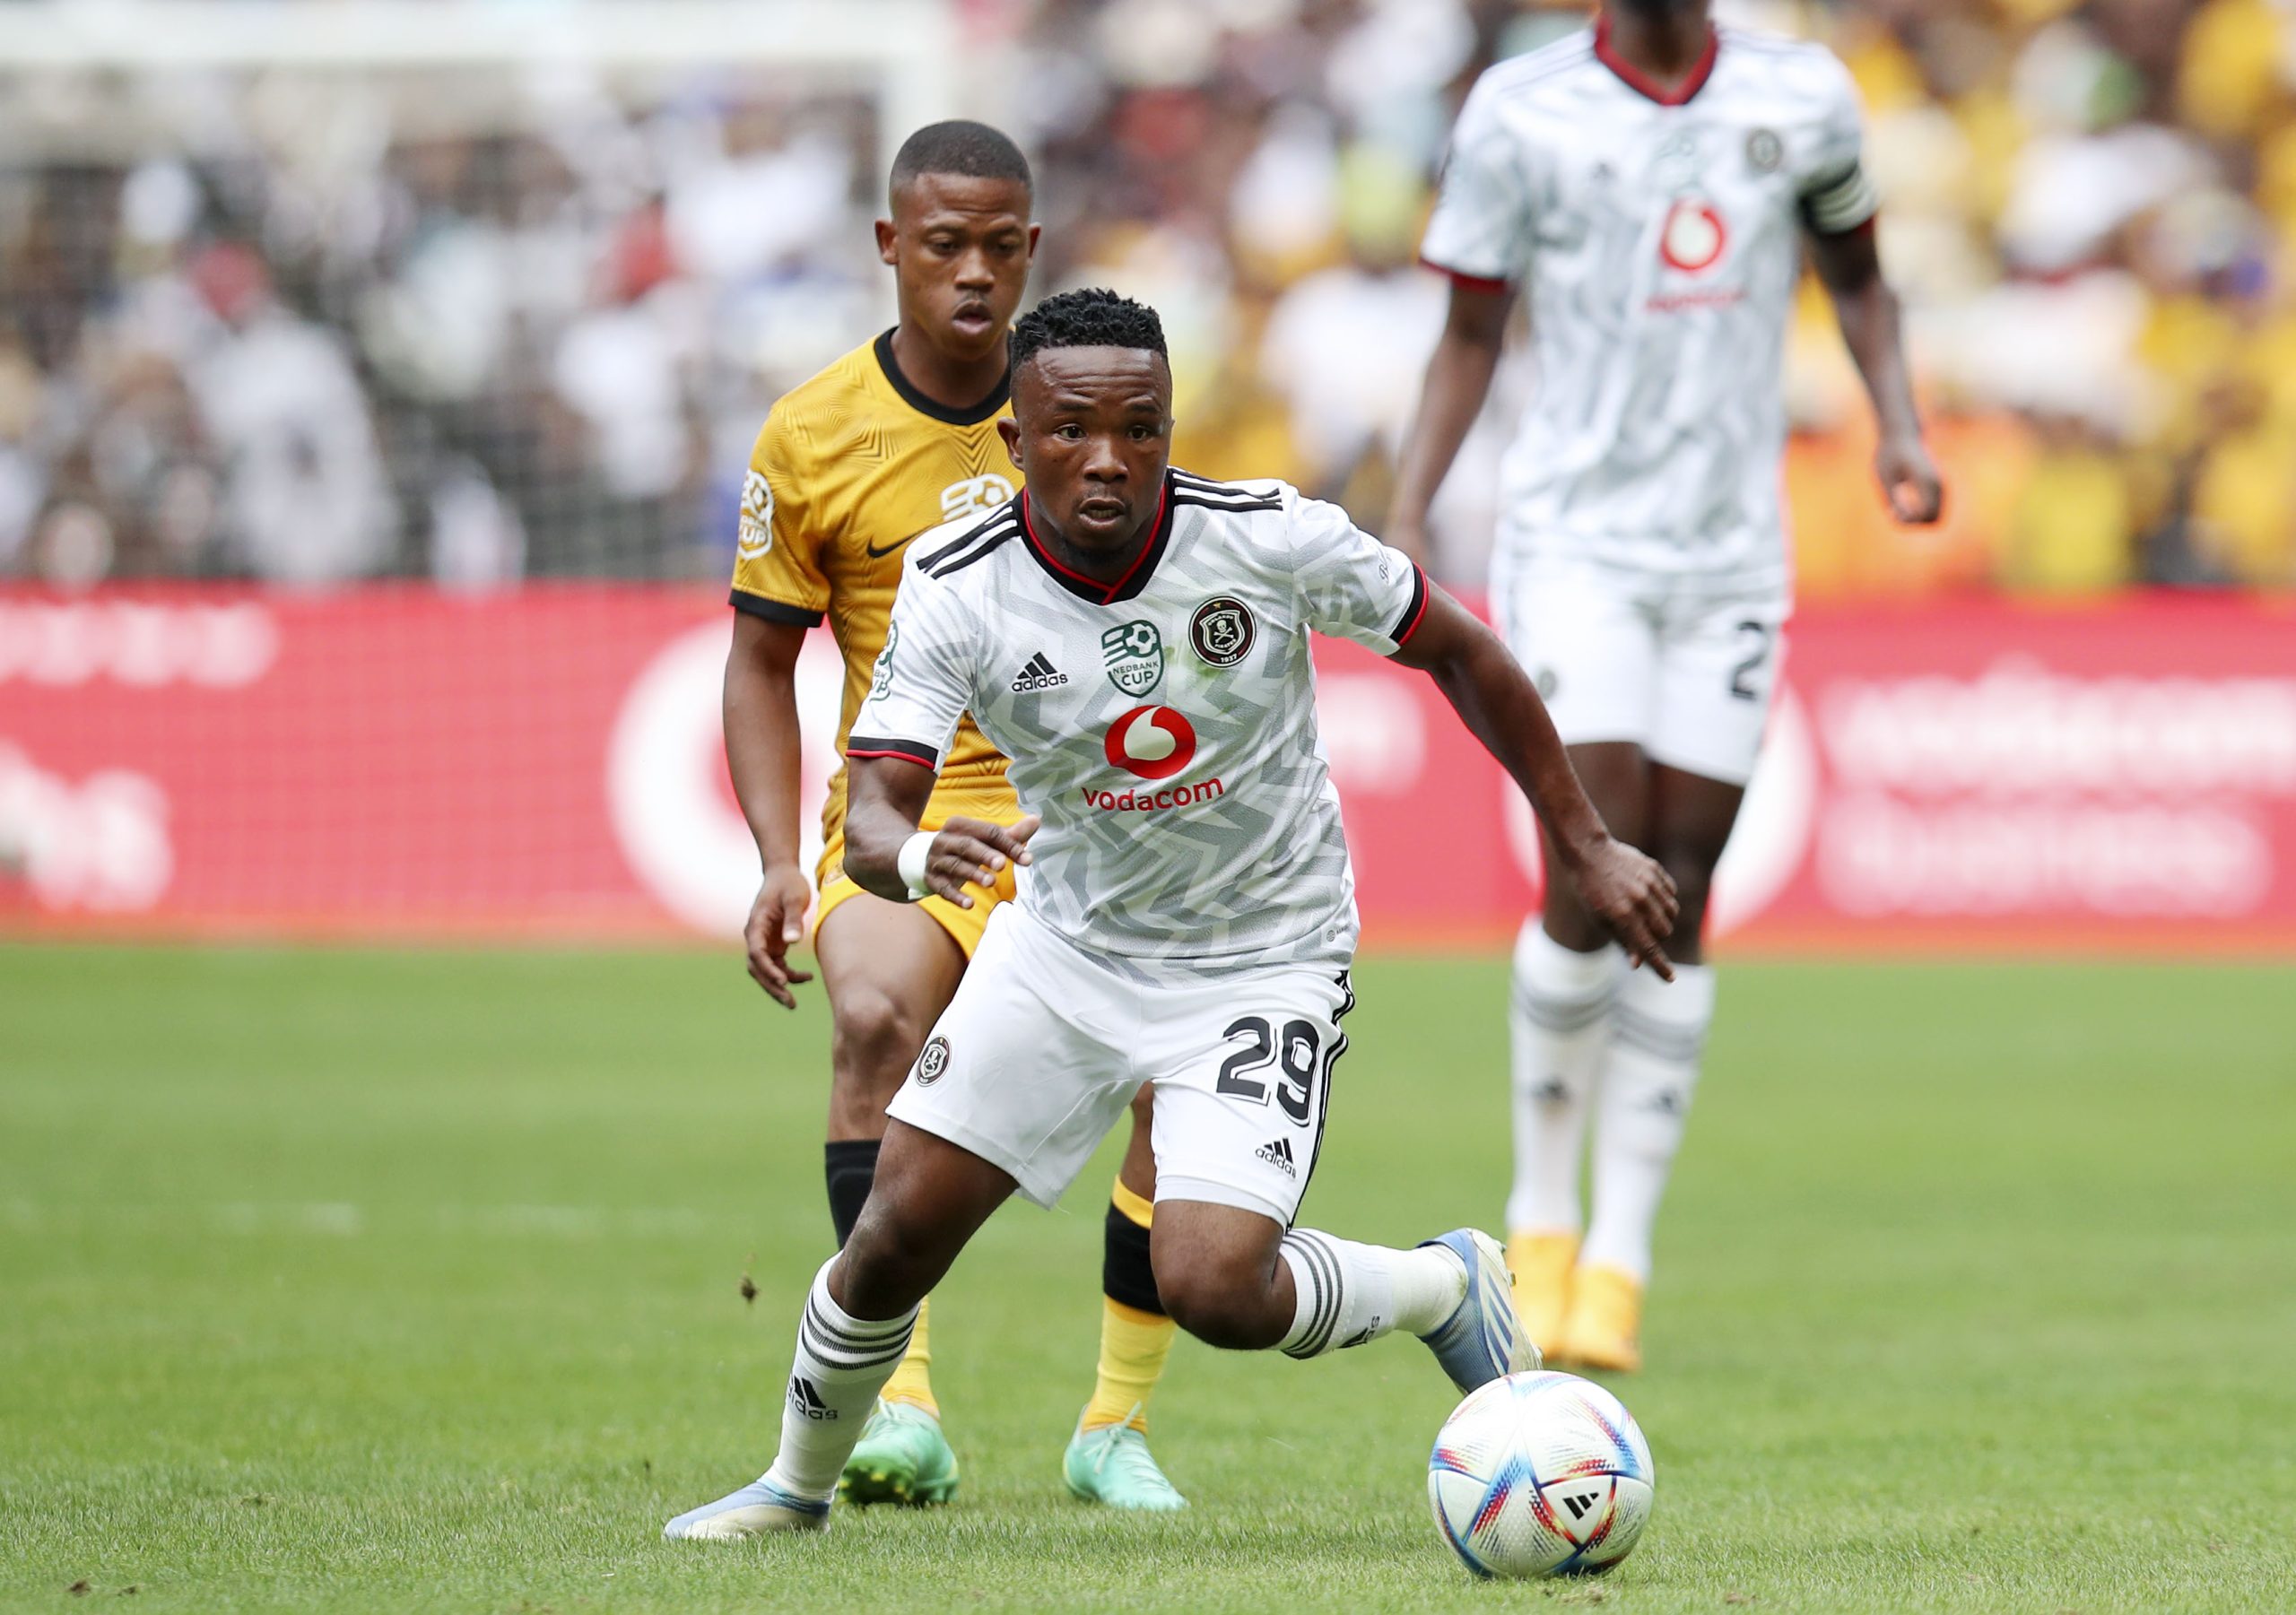 Orlando Pirates are through to the Nedbank Cup final after beating  archrivals Kaizer Chiefs – On the Pitch